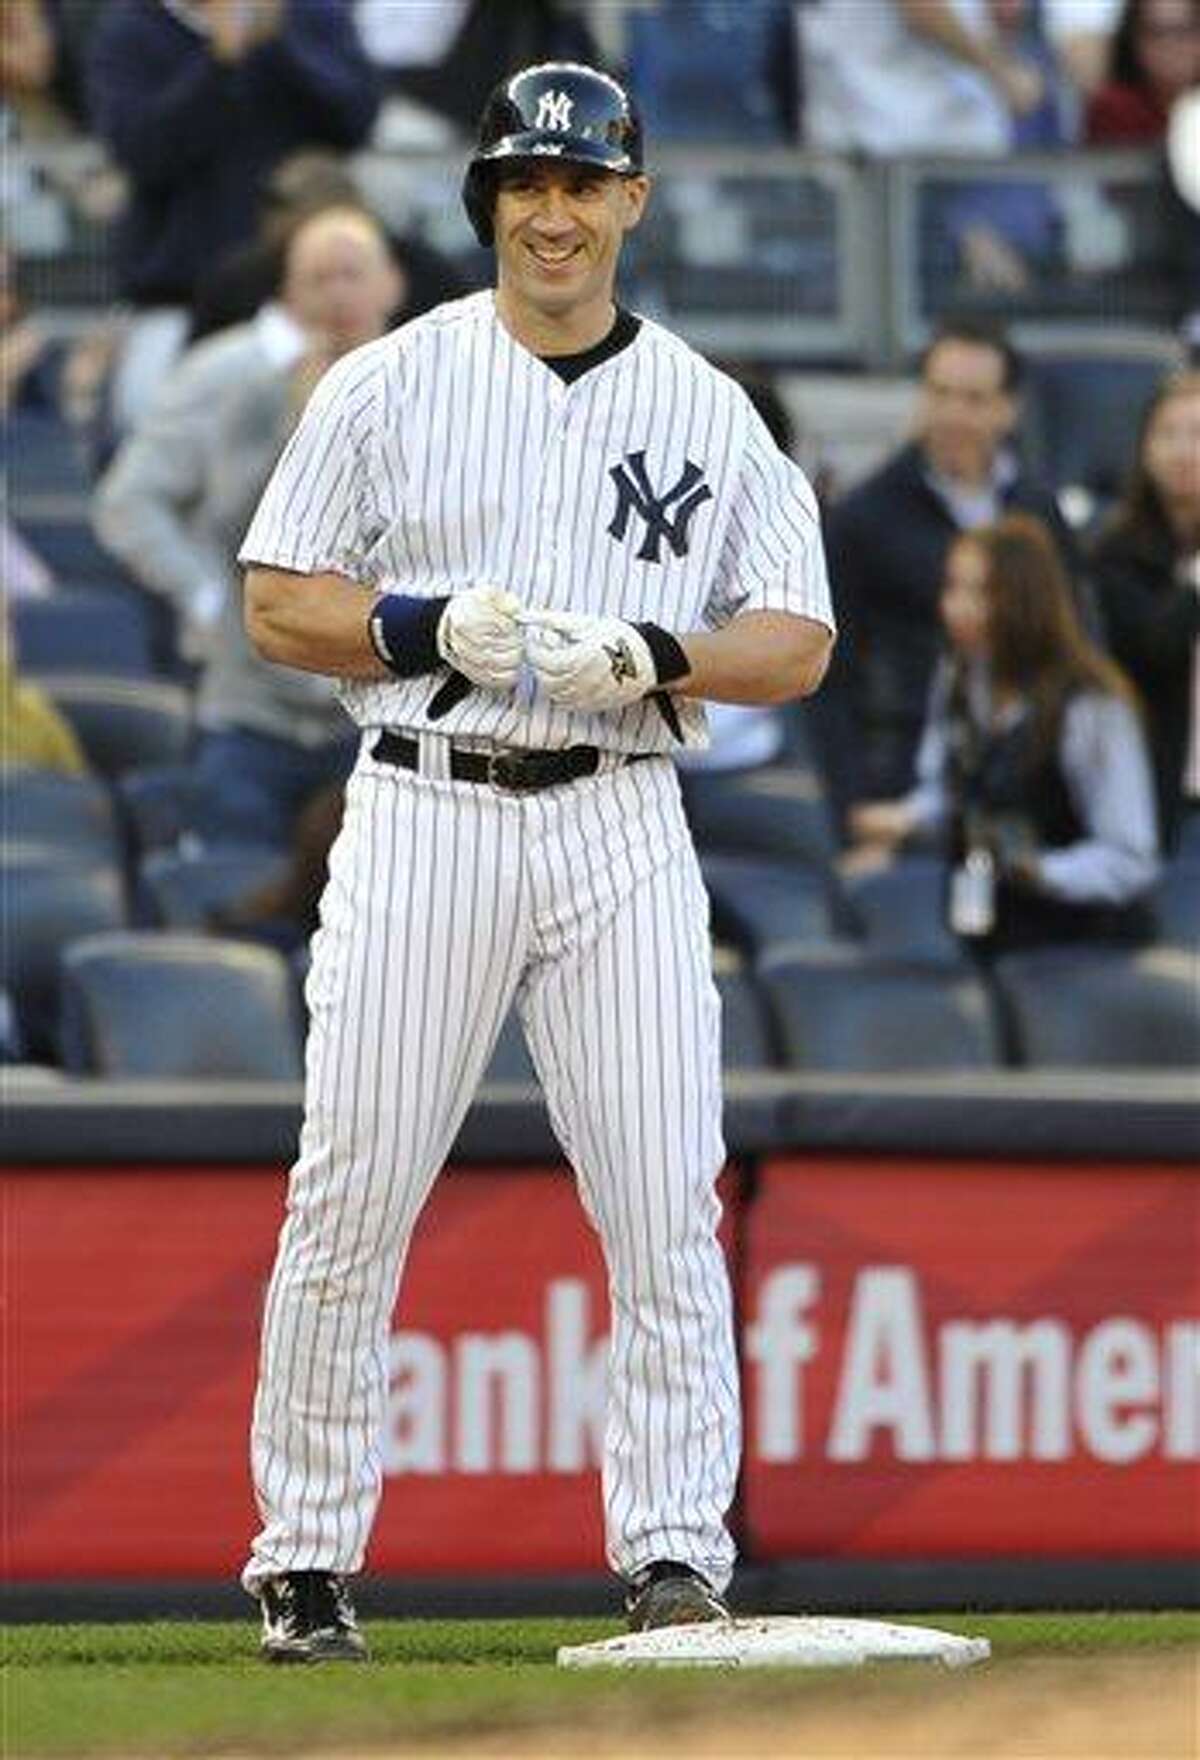 New York Yankees designated hitter Travis Hafner smiles at third base after he hit an RBI triple off of Toronto Blue Jays relief pitcher Brett Cecil in the seventh inning of a baseball game at Yankee Stadium on Saturday, April 27, 2013 in New York. Haffner also hit a three-run home run in the fourth inning. (AP Photo/Kathy Kmonicek)